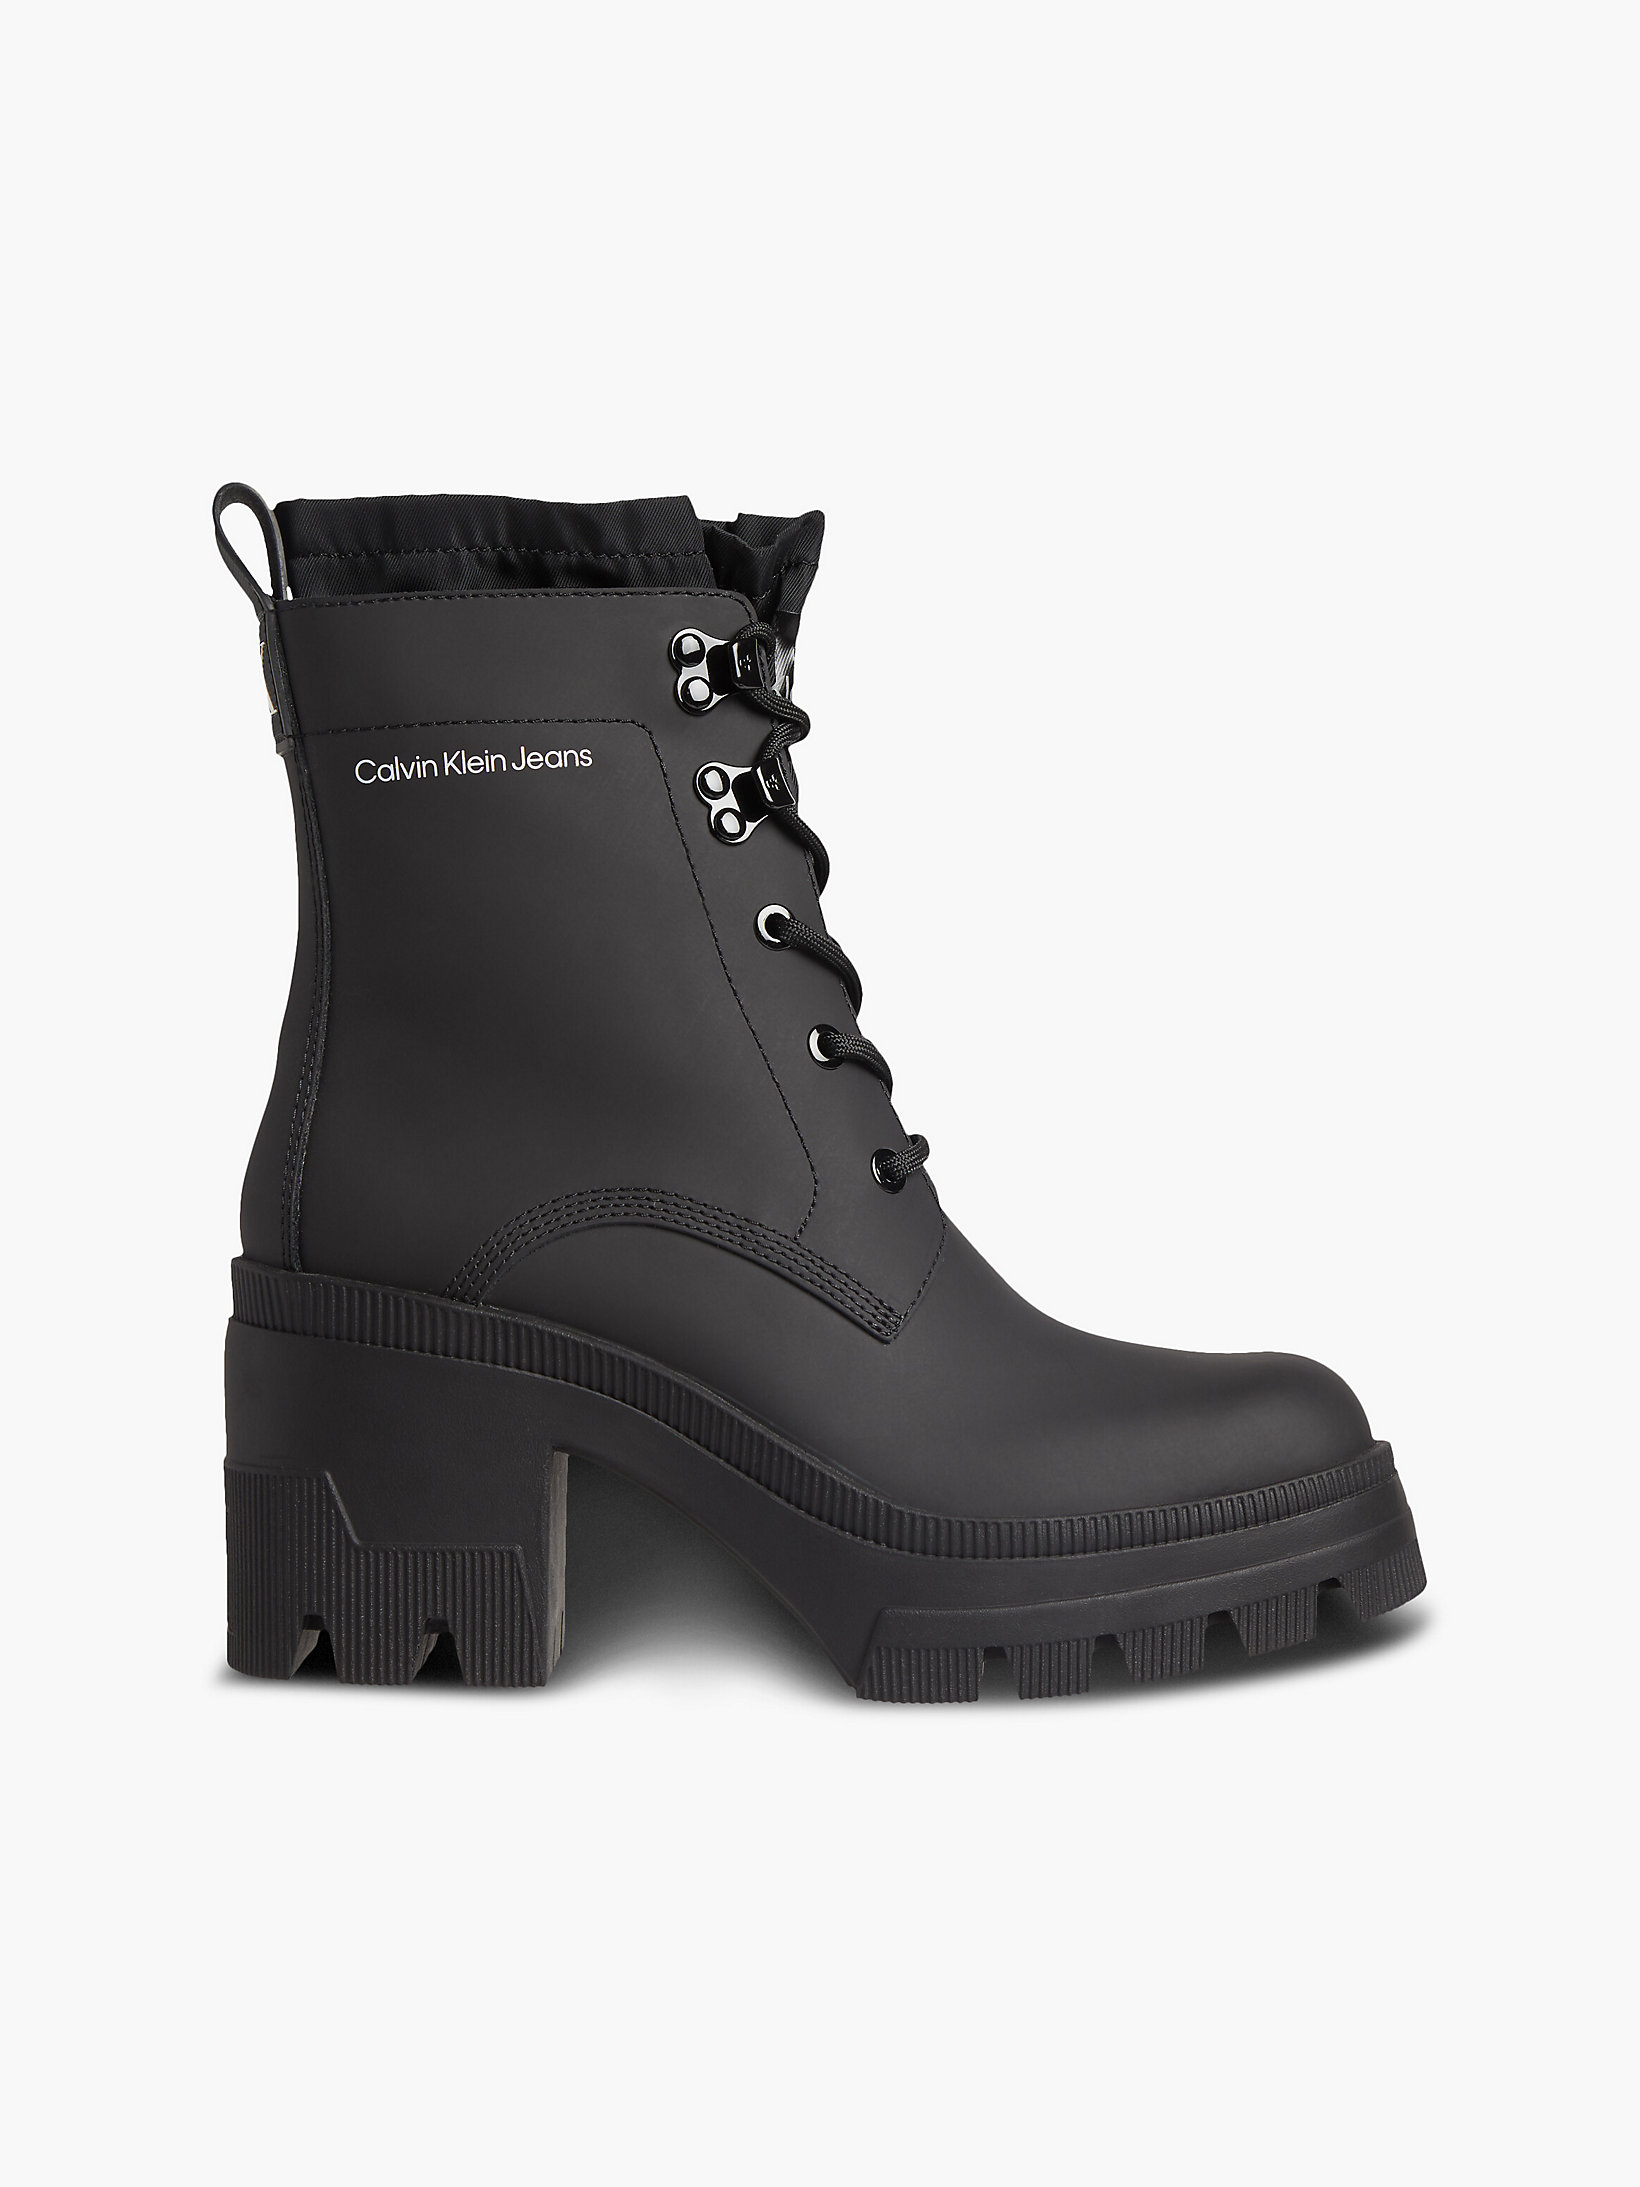 Black Leather Chunky Heeled Boots undefined women Calvin Klein